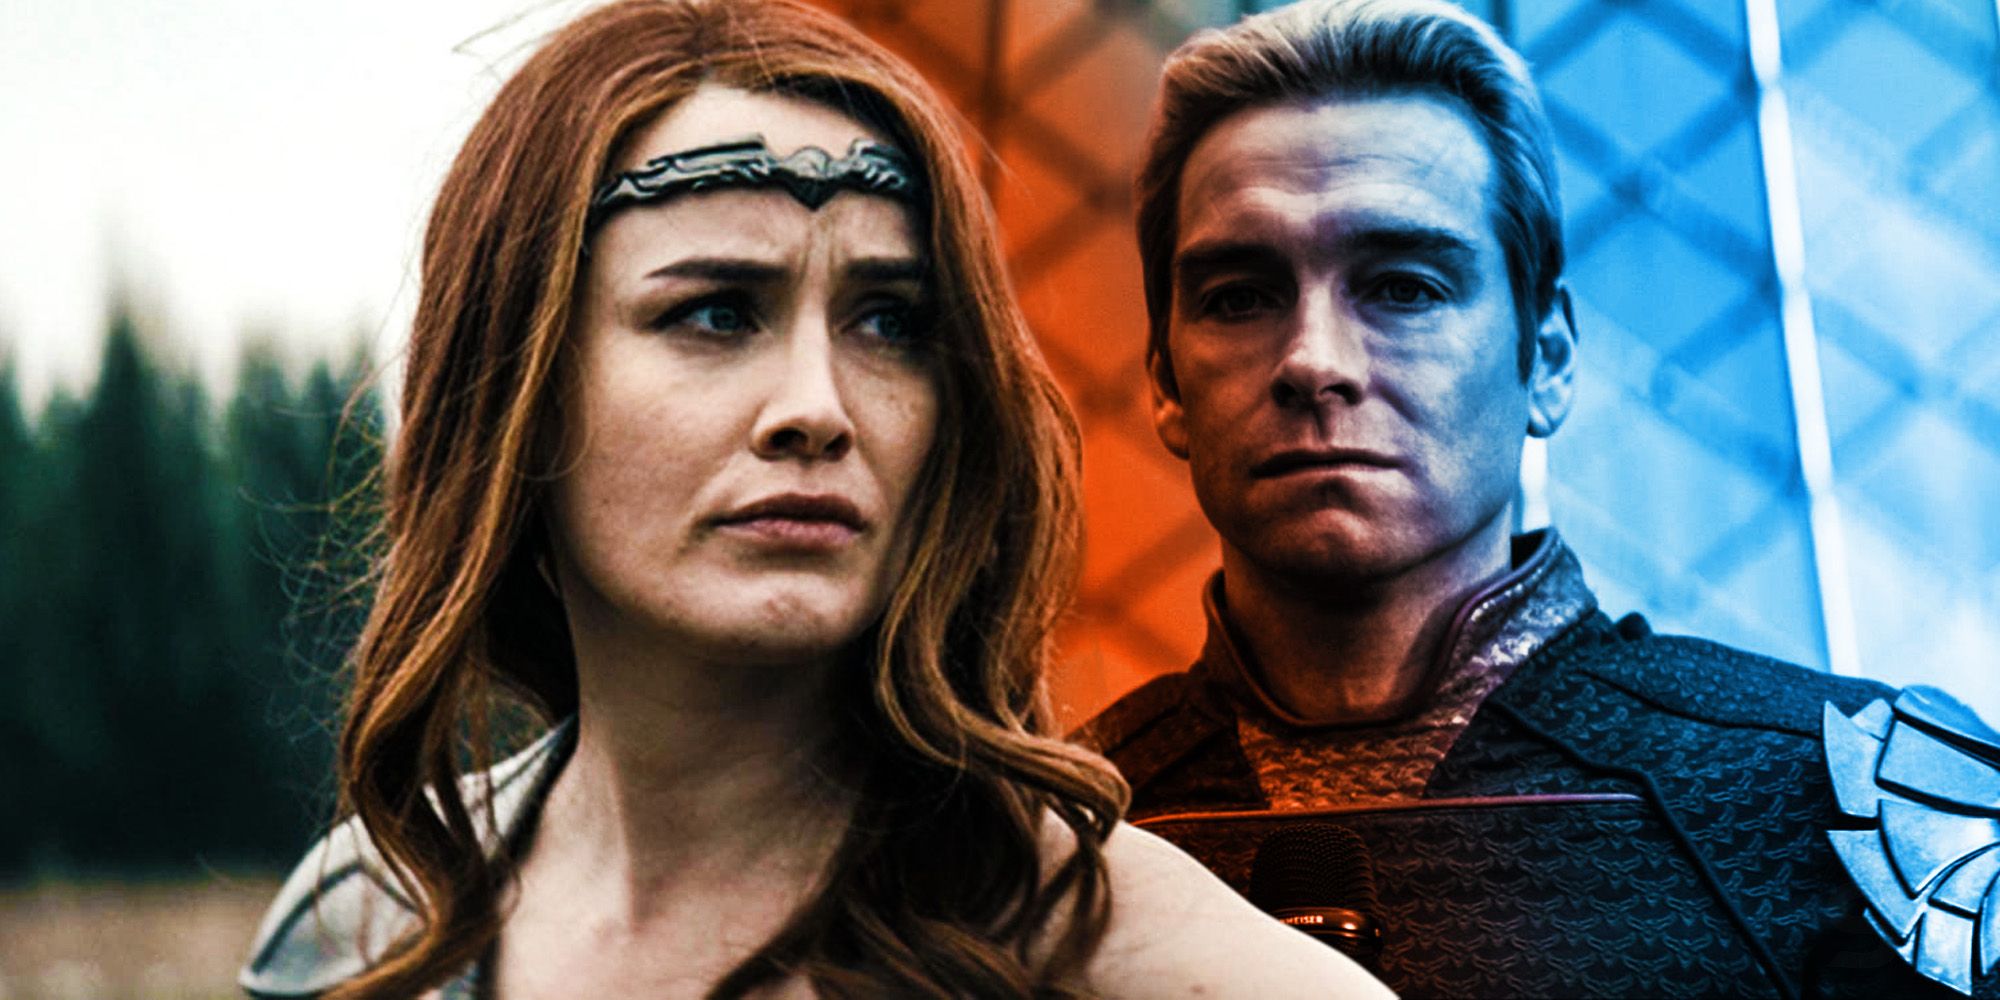 The Boys Homelander And Queen Maeve Relationship Explained (And Why They Broke Up)